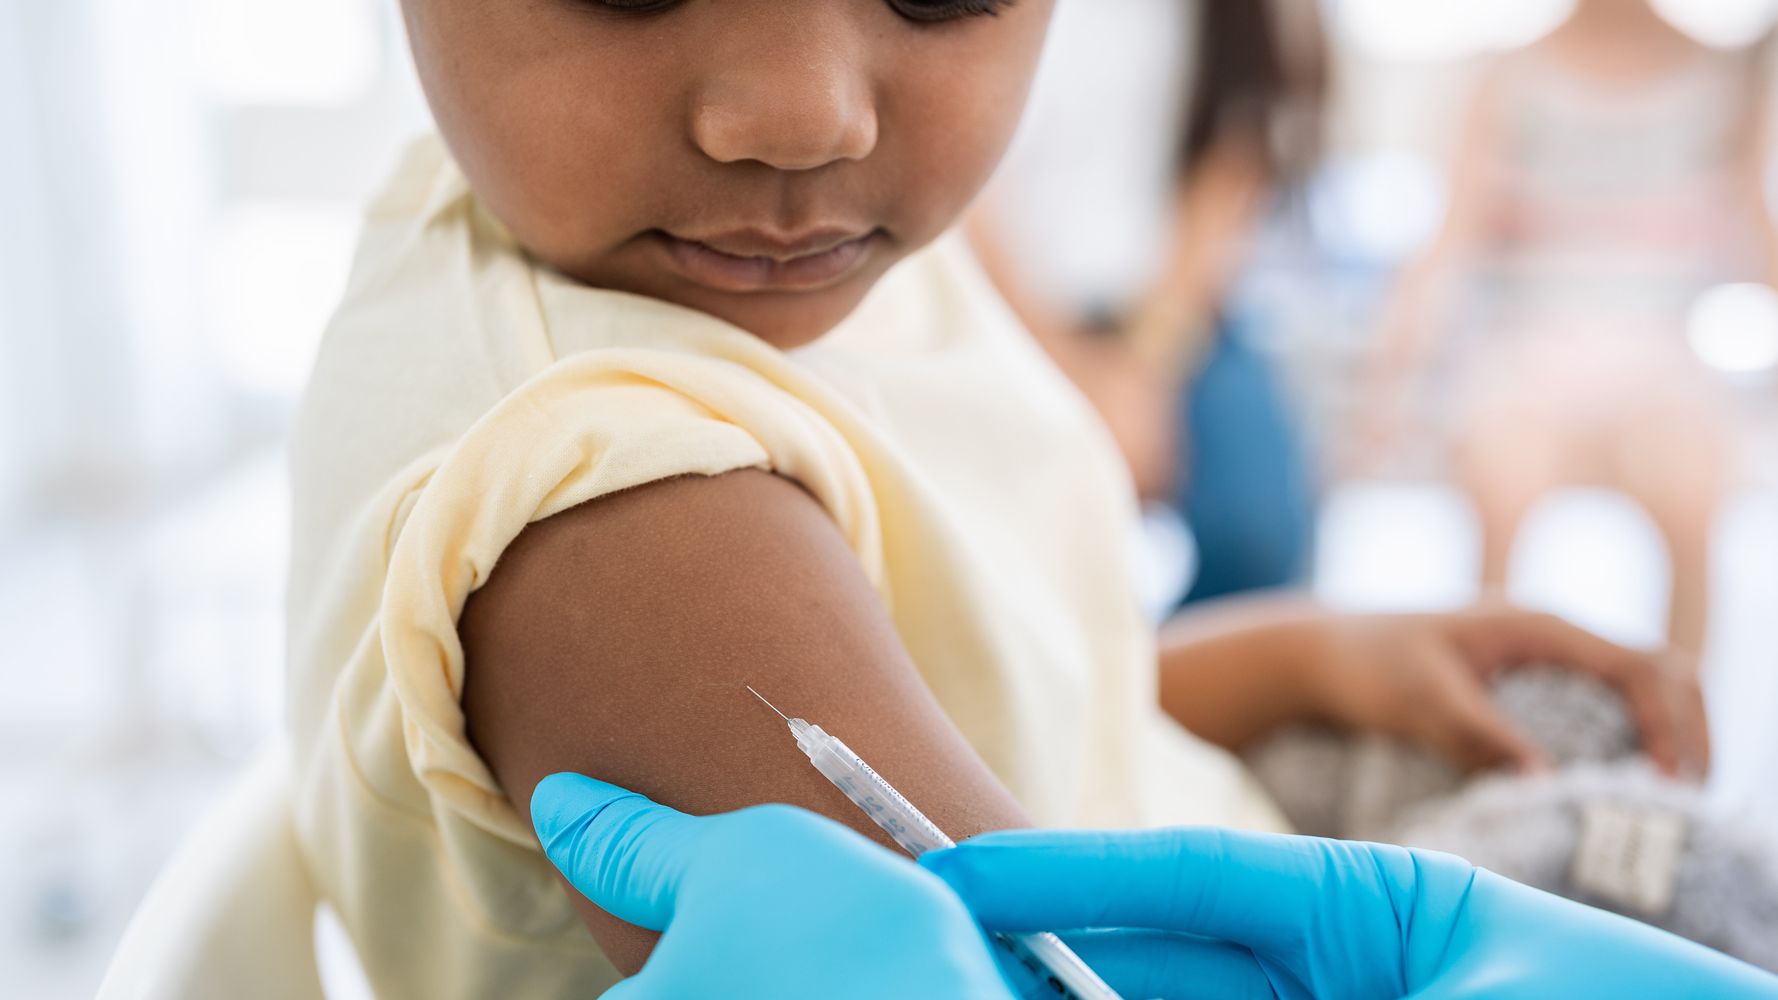 The Most Common Side Effects Of The COVID Vaccine In Kids Under 5 (And How To Alleviate Them)